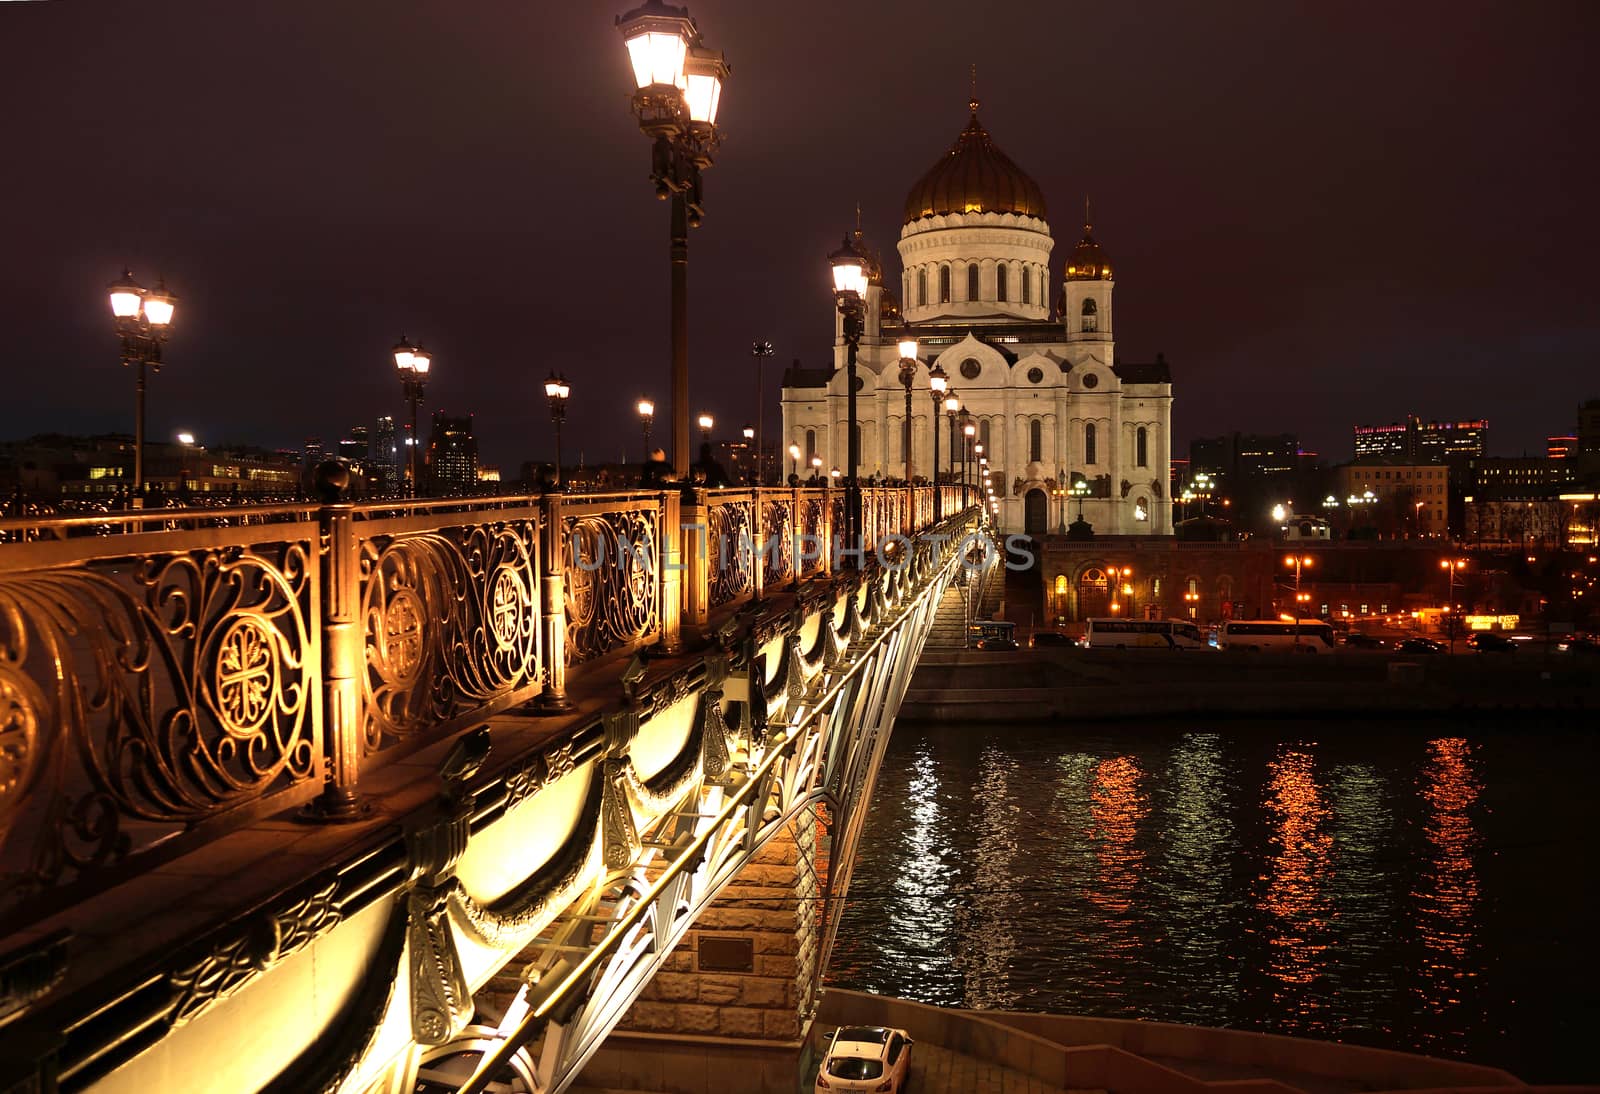 Cathedral of Christ the Saviour by Vadimdem